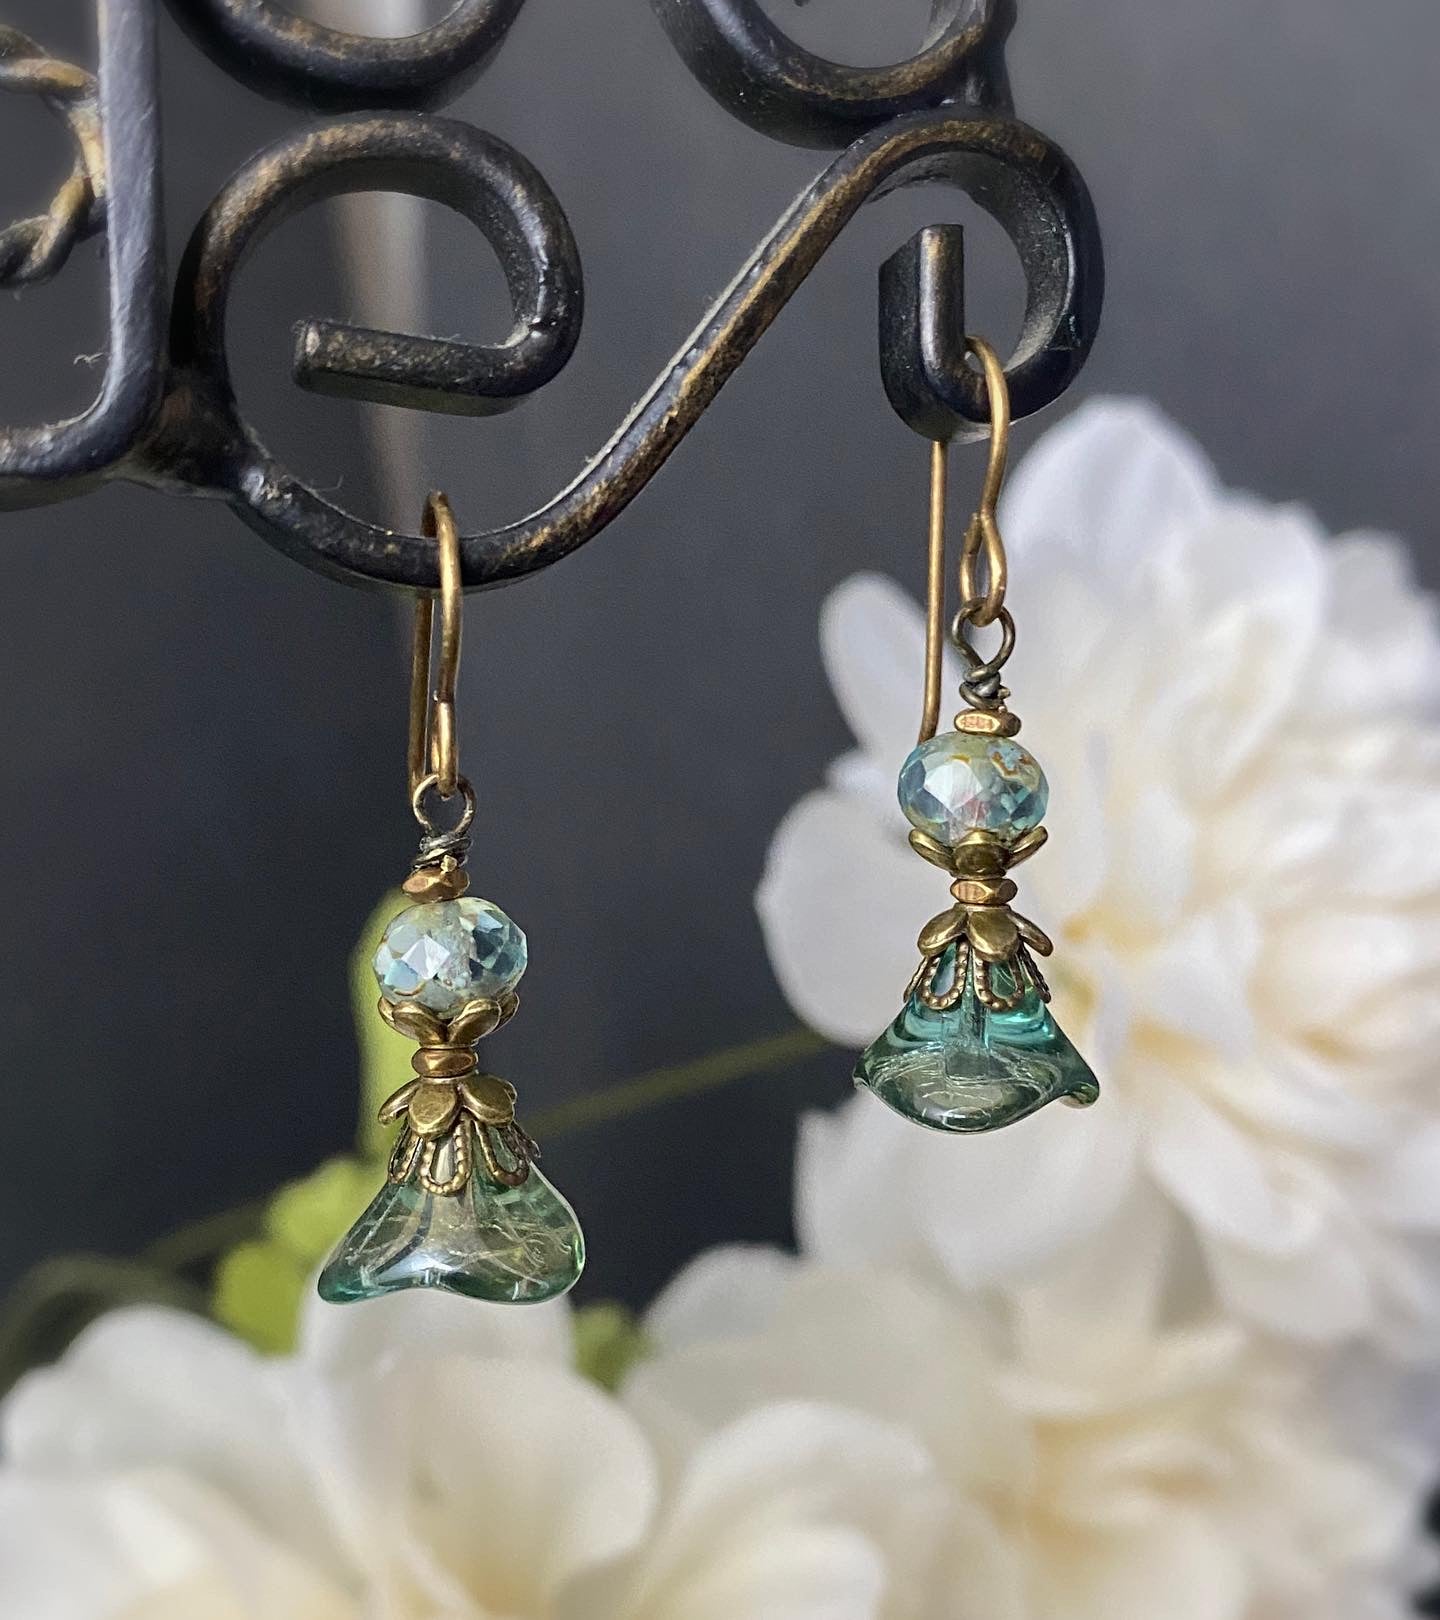 Teal Flower Czech glass, small earrings, and copper metal earrings. - Andria Bieber Designs 